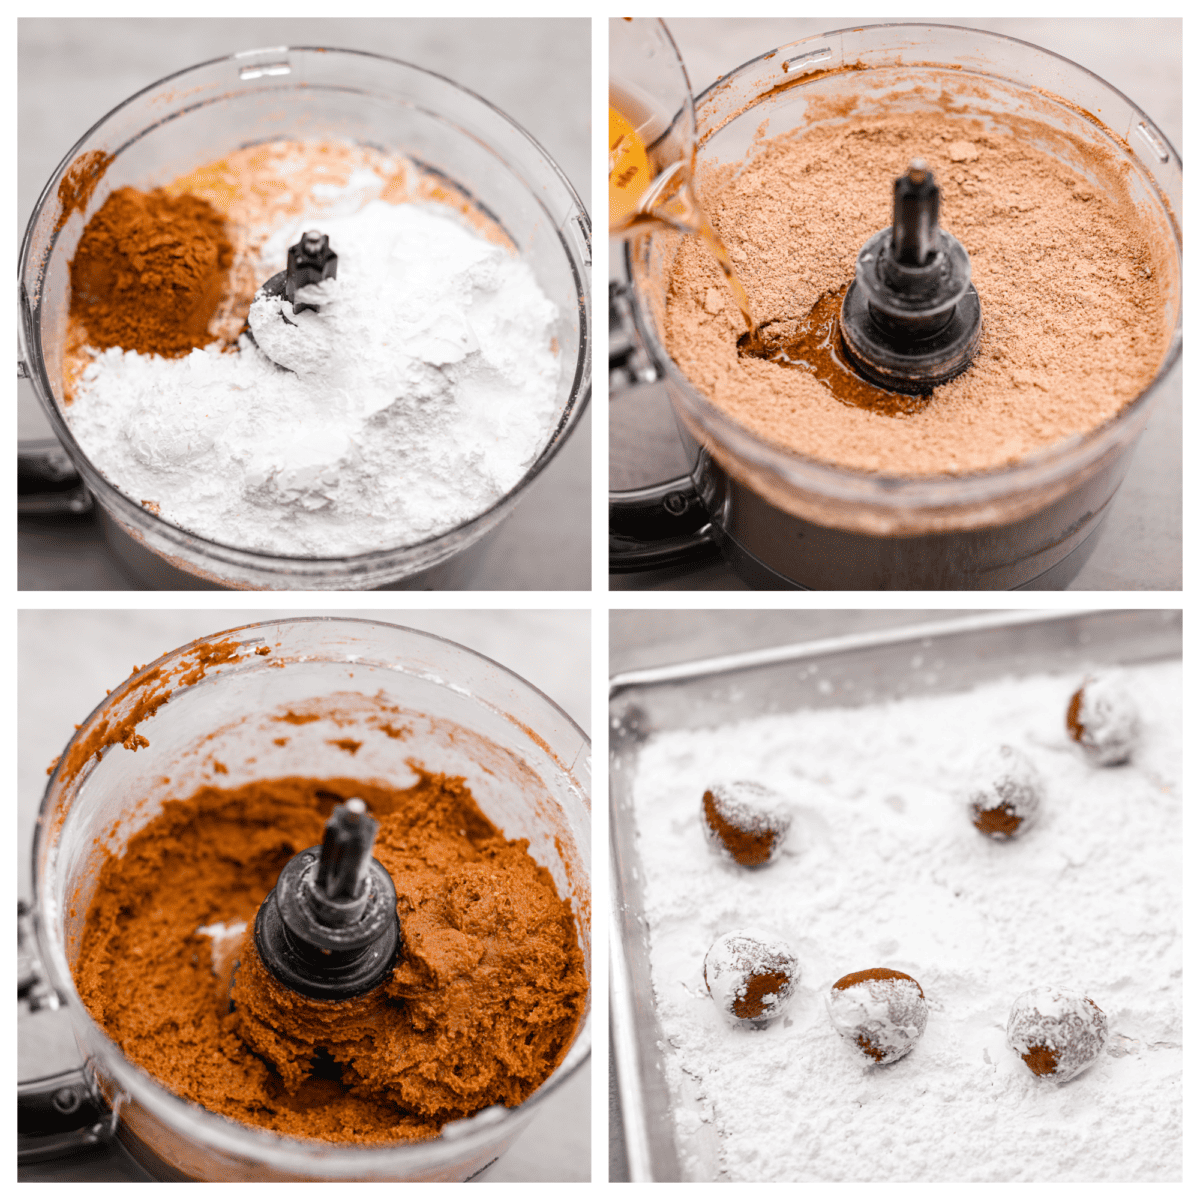 First photo of cookie crumbs, powdered sugar, and cocoa powder in a food processor. Second photo of rum pouring into the food processor. Third photo of the dough mixed in the food processor. Fourth photo of the rum balls rolling in powdered sugar.